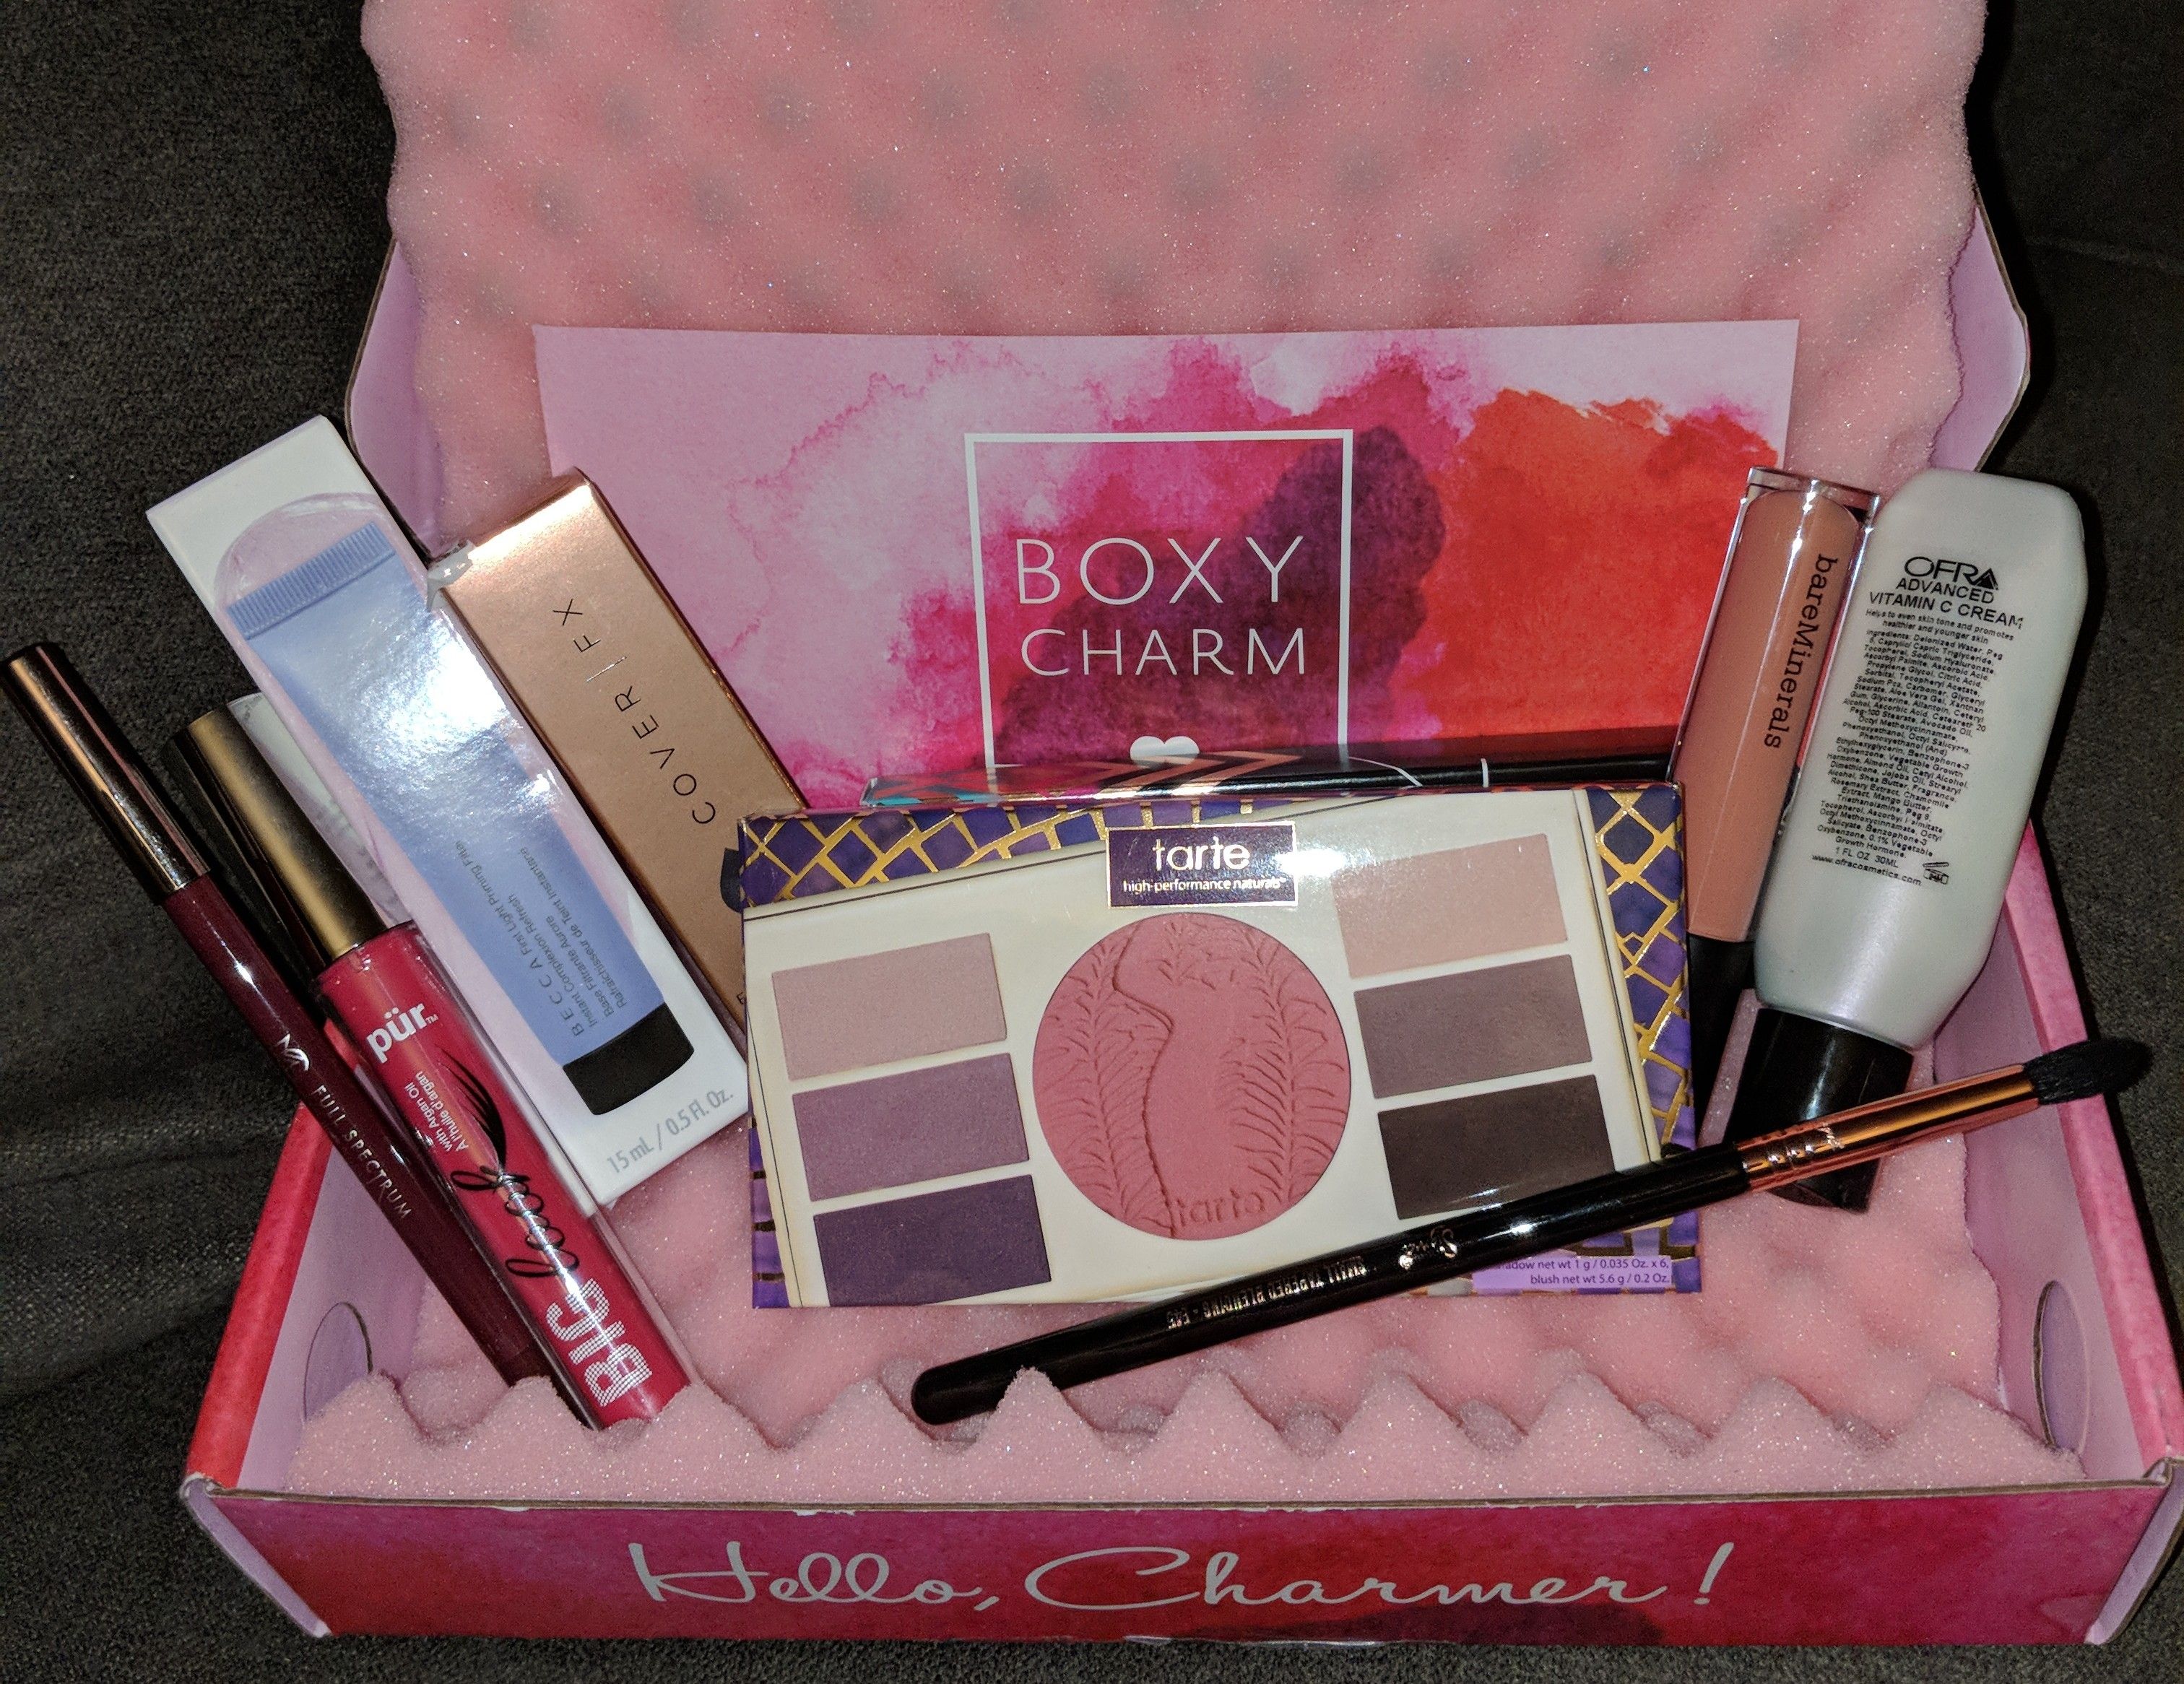 Boxycharm Limited Edition came in yester... - Page 246 - Beauty Insider  Community